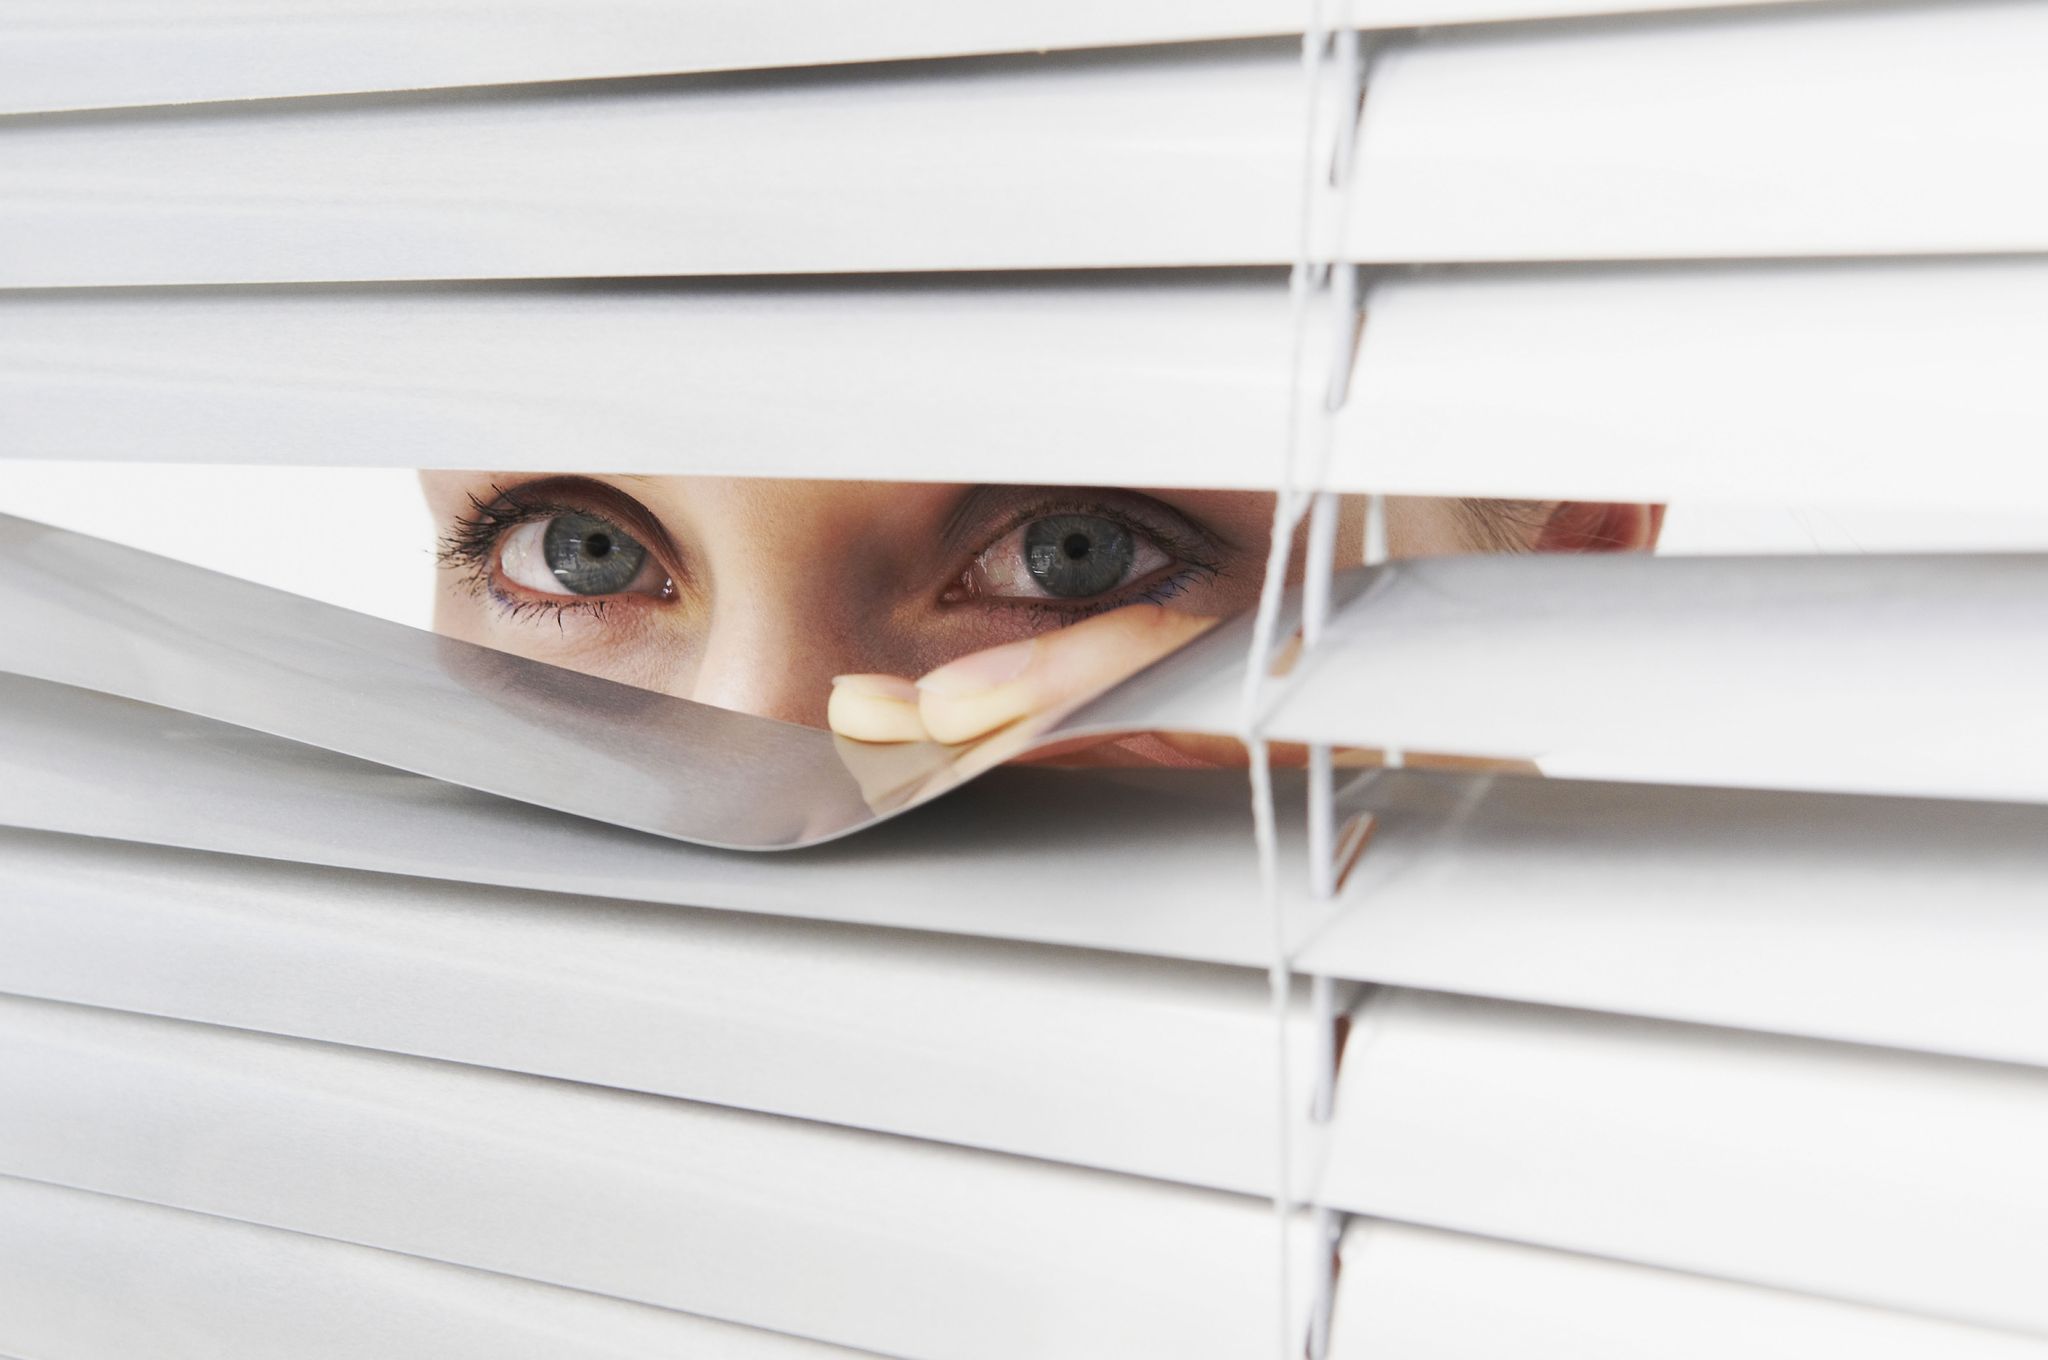 Woman looks through blinds